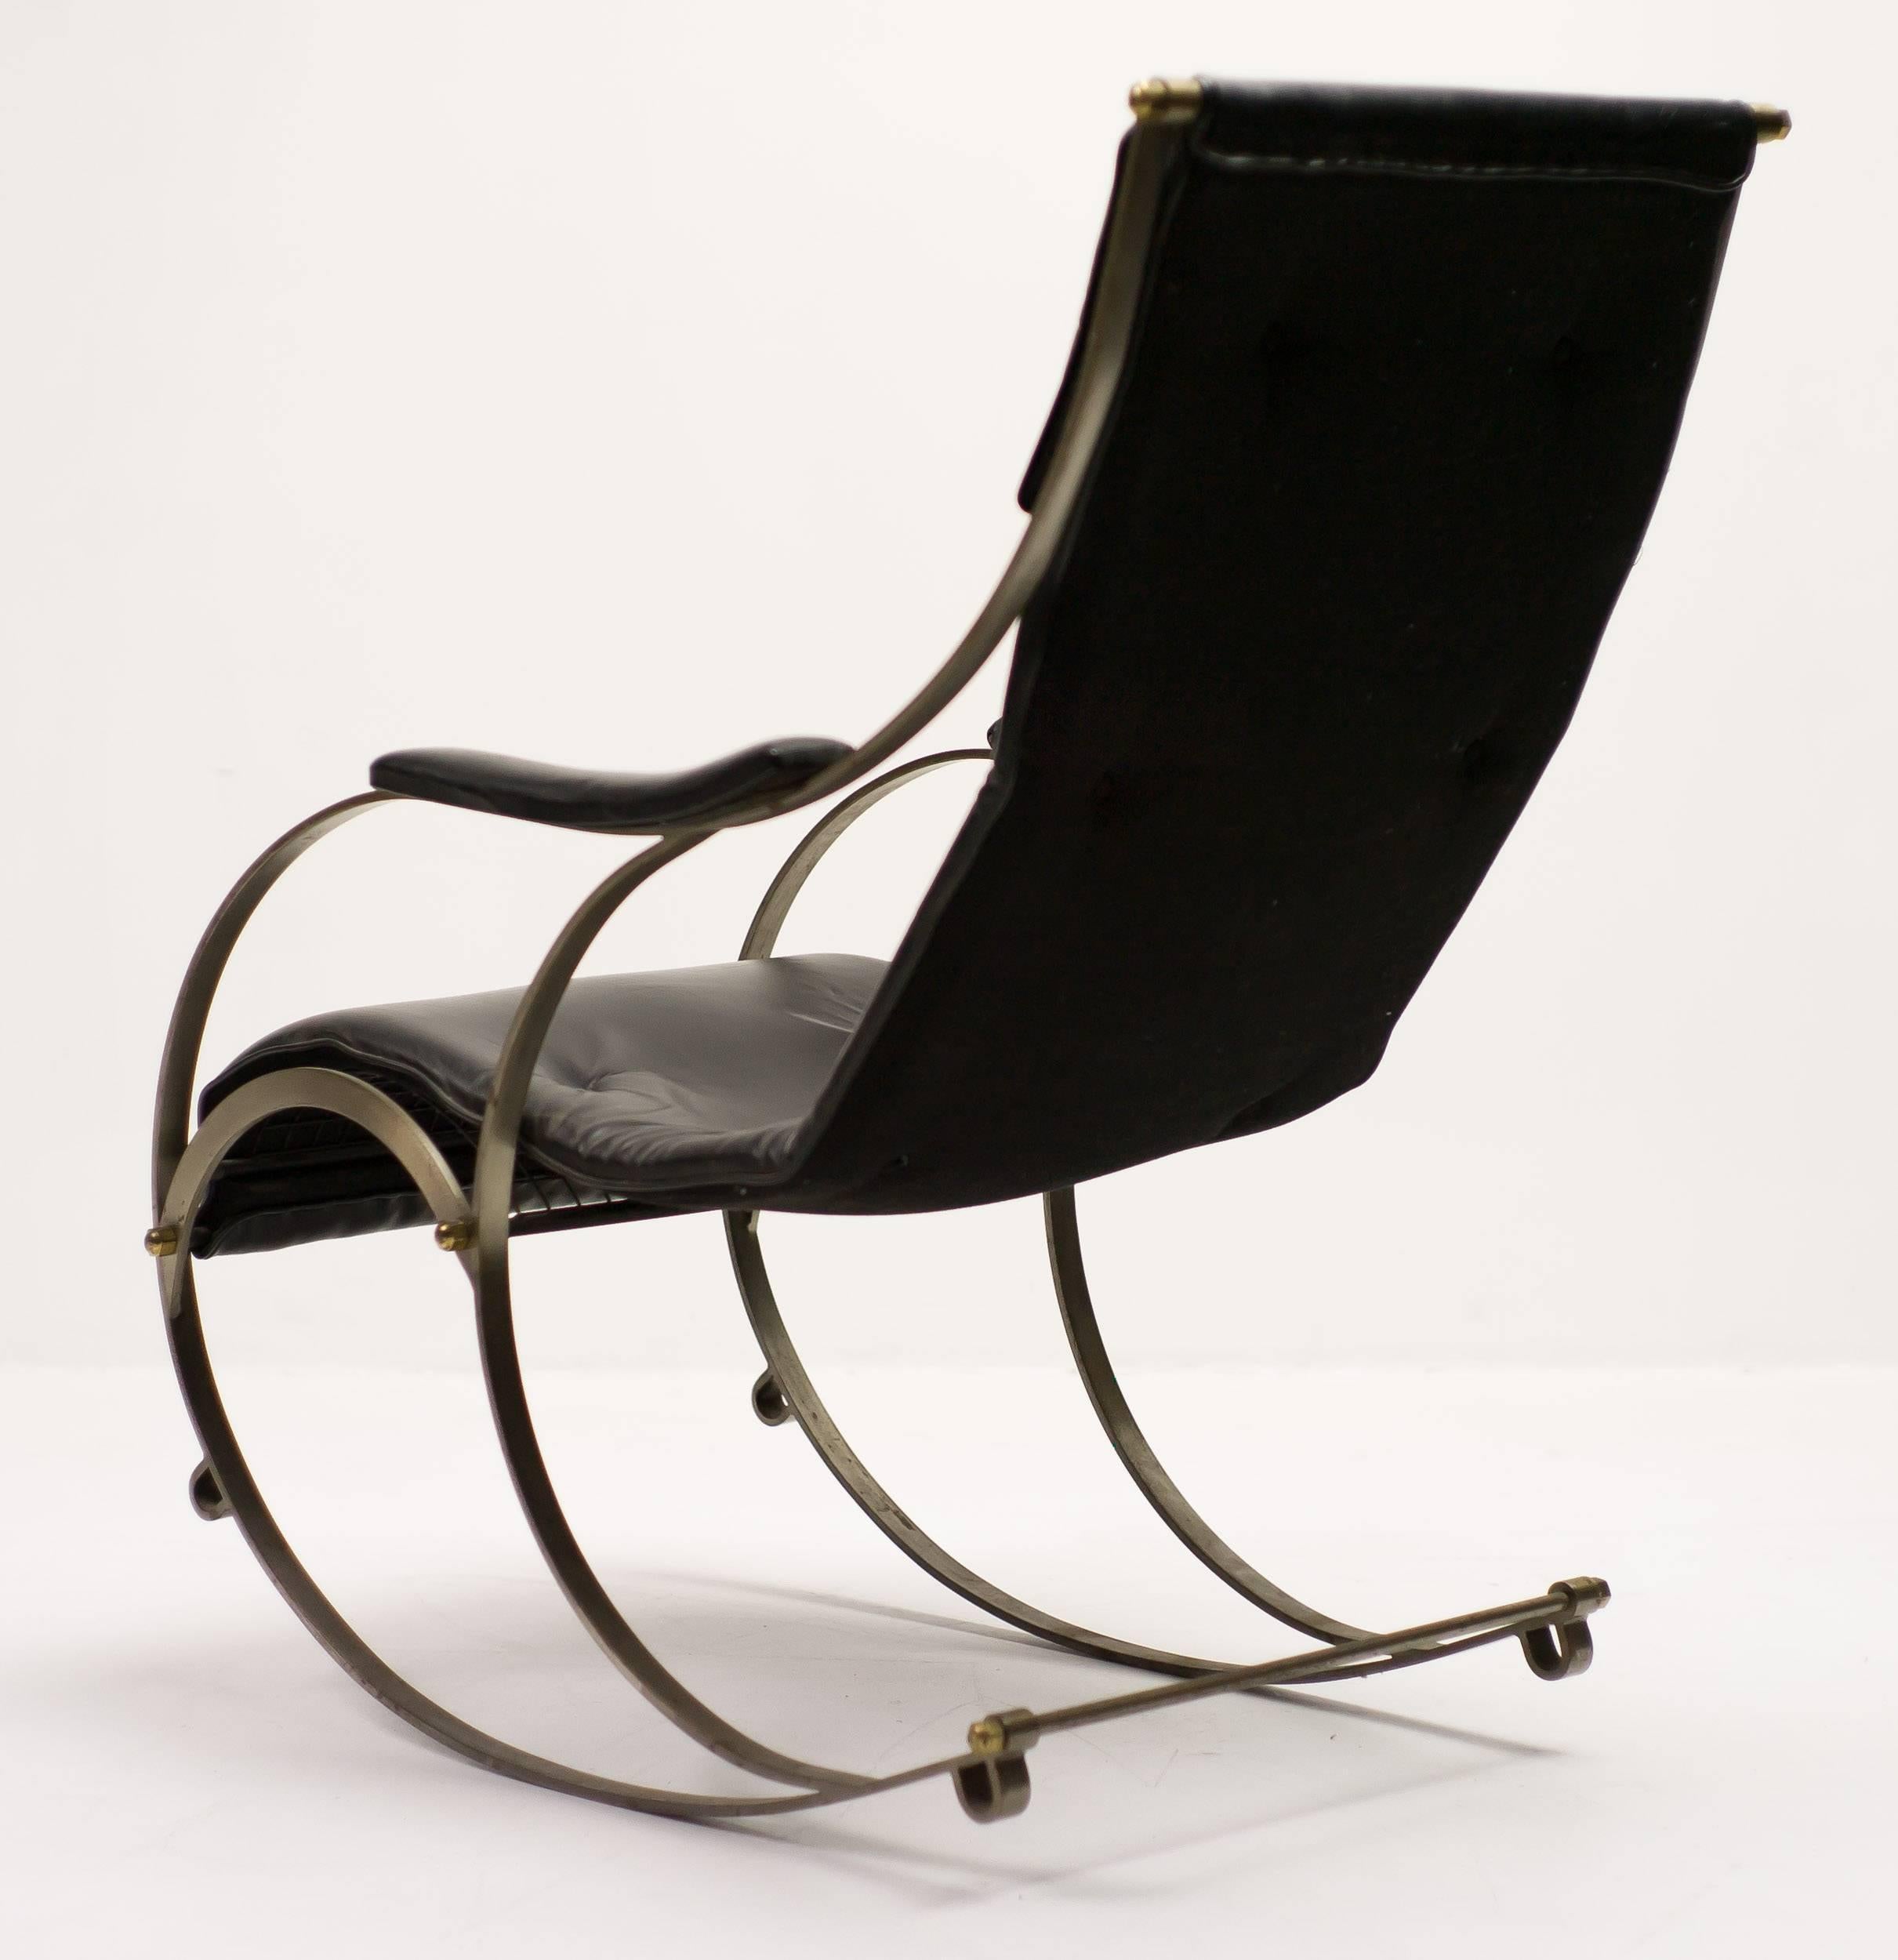 English 19th Century Steel and Leather Rocking Chair by R.W. Winfield